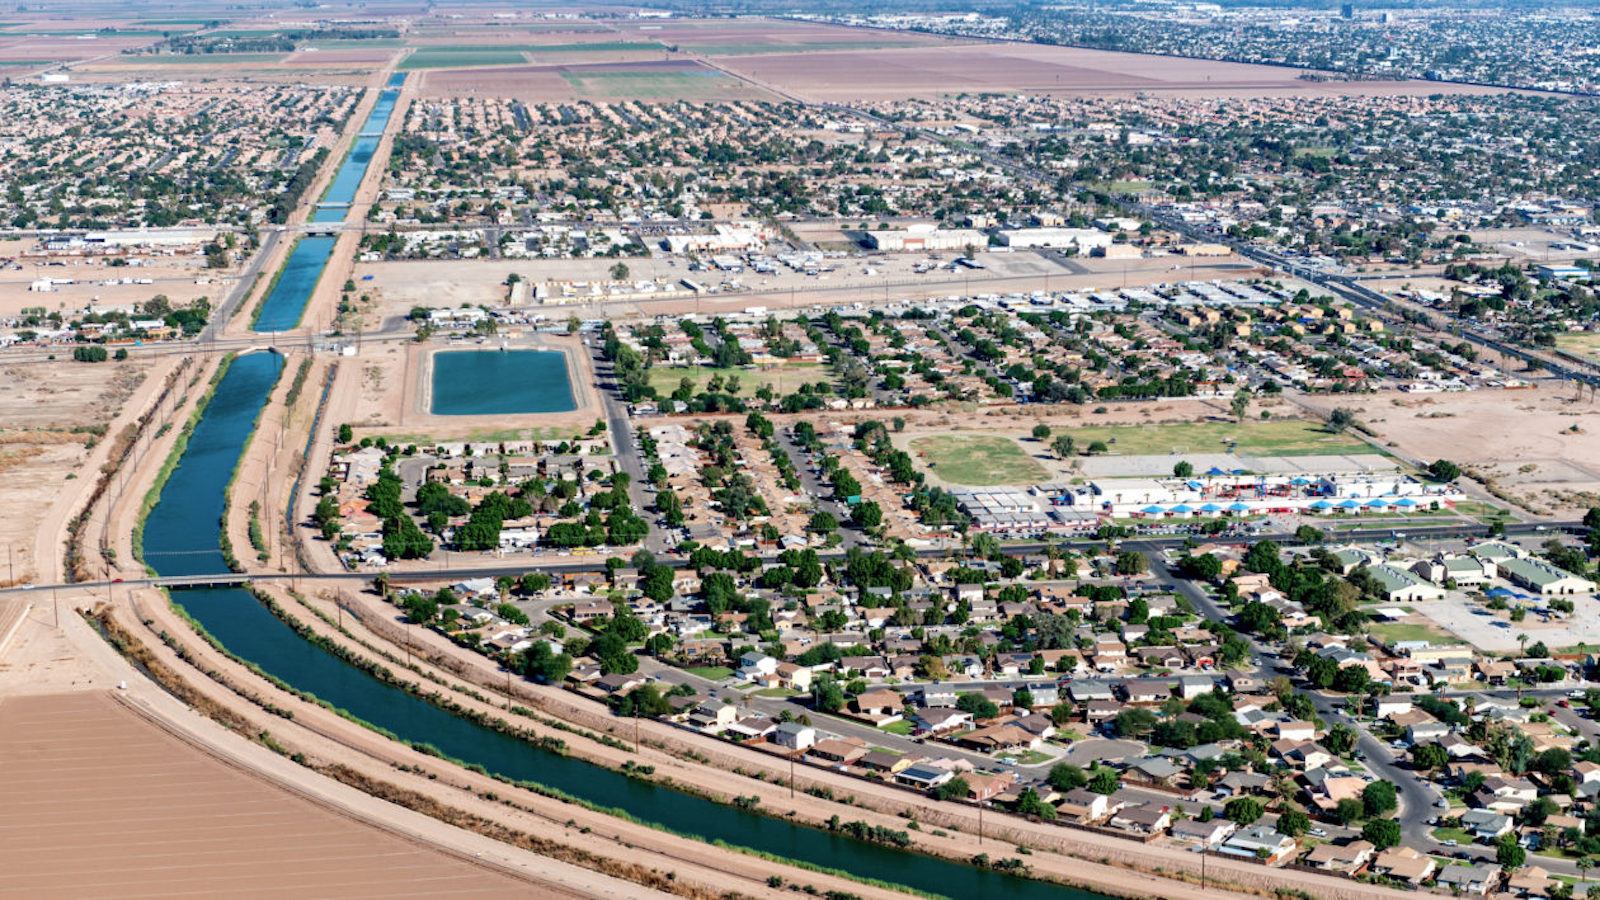 San Diego has shored up its water supplies by upgrading the All-American Canal, which takes Colorado River water to California's Imperial Valley.